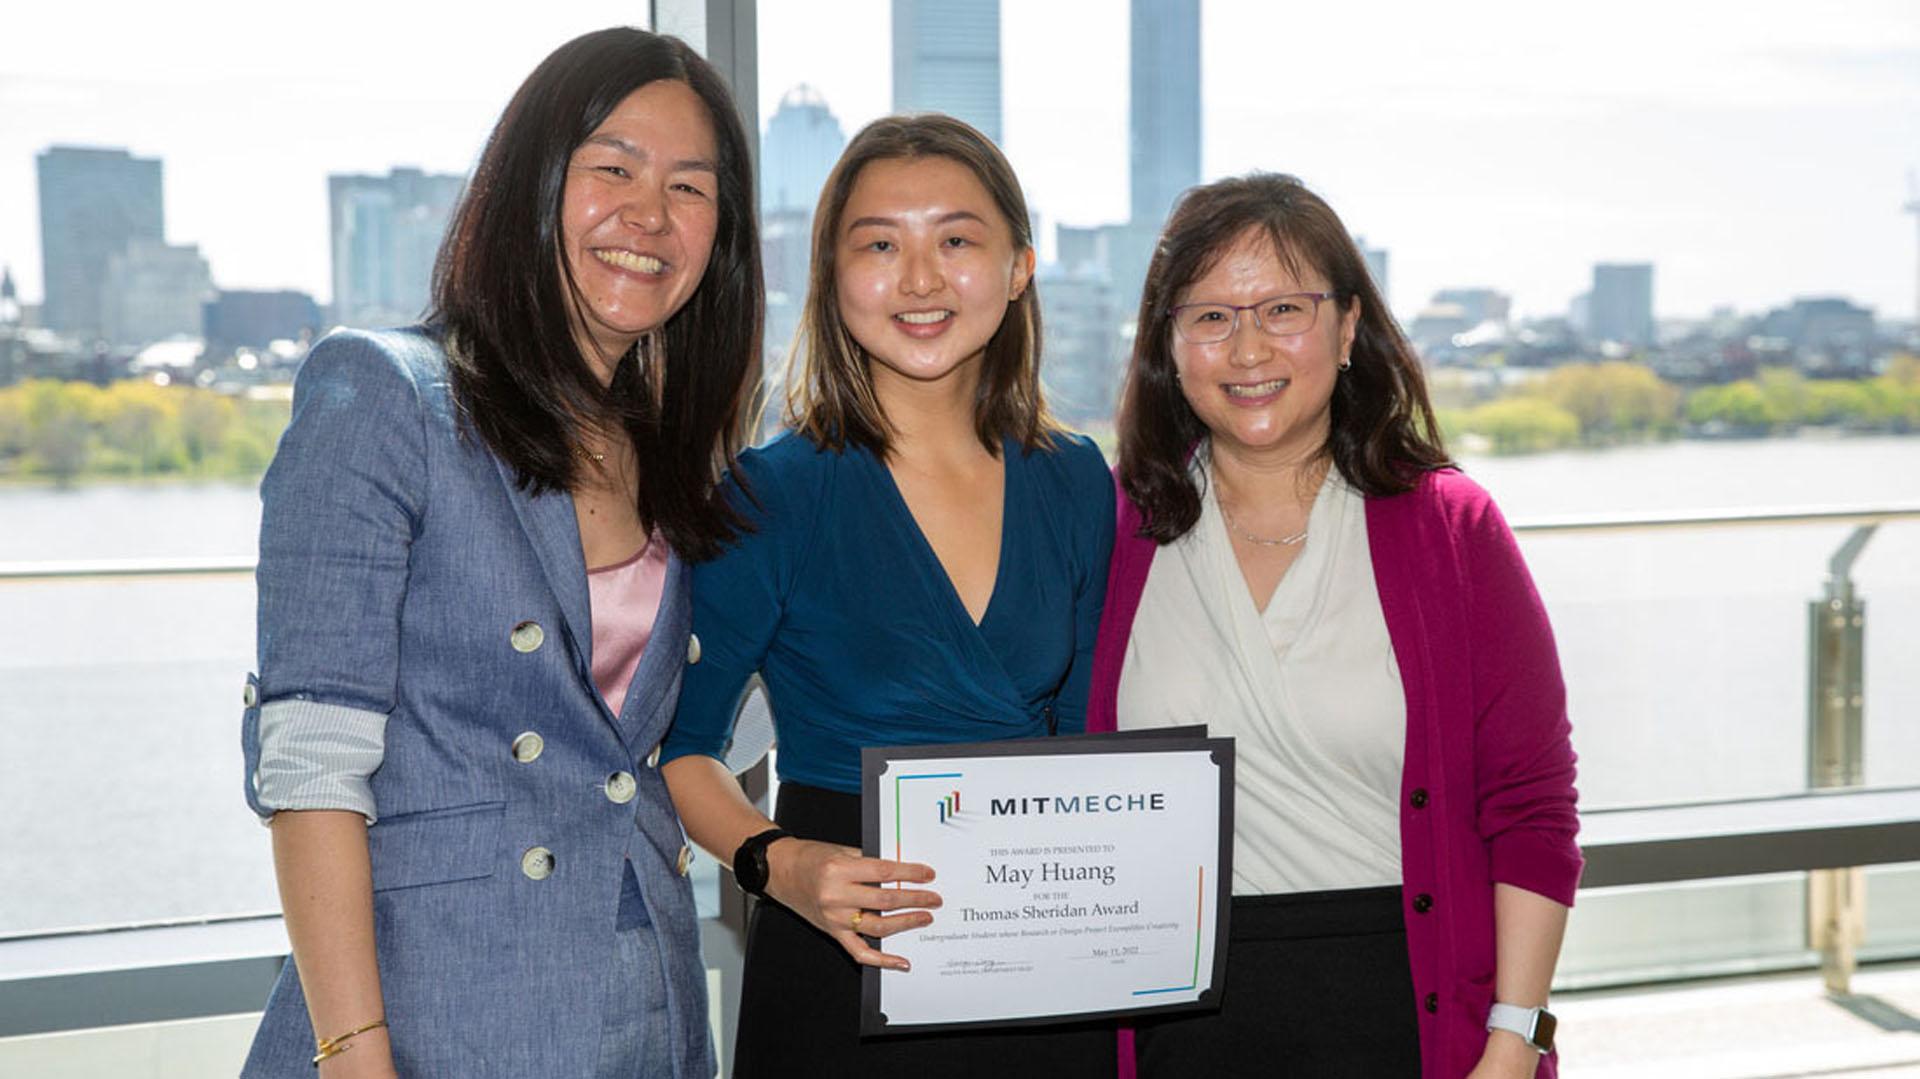 On May 11, MechE hosted the first in-person Student Awards Luncheon in 3 years! Students, faculty, and staff gathered in Samberg Conference Center to celebrate the accomplishments of MechE students.